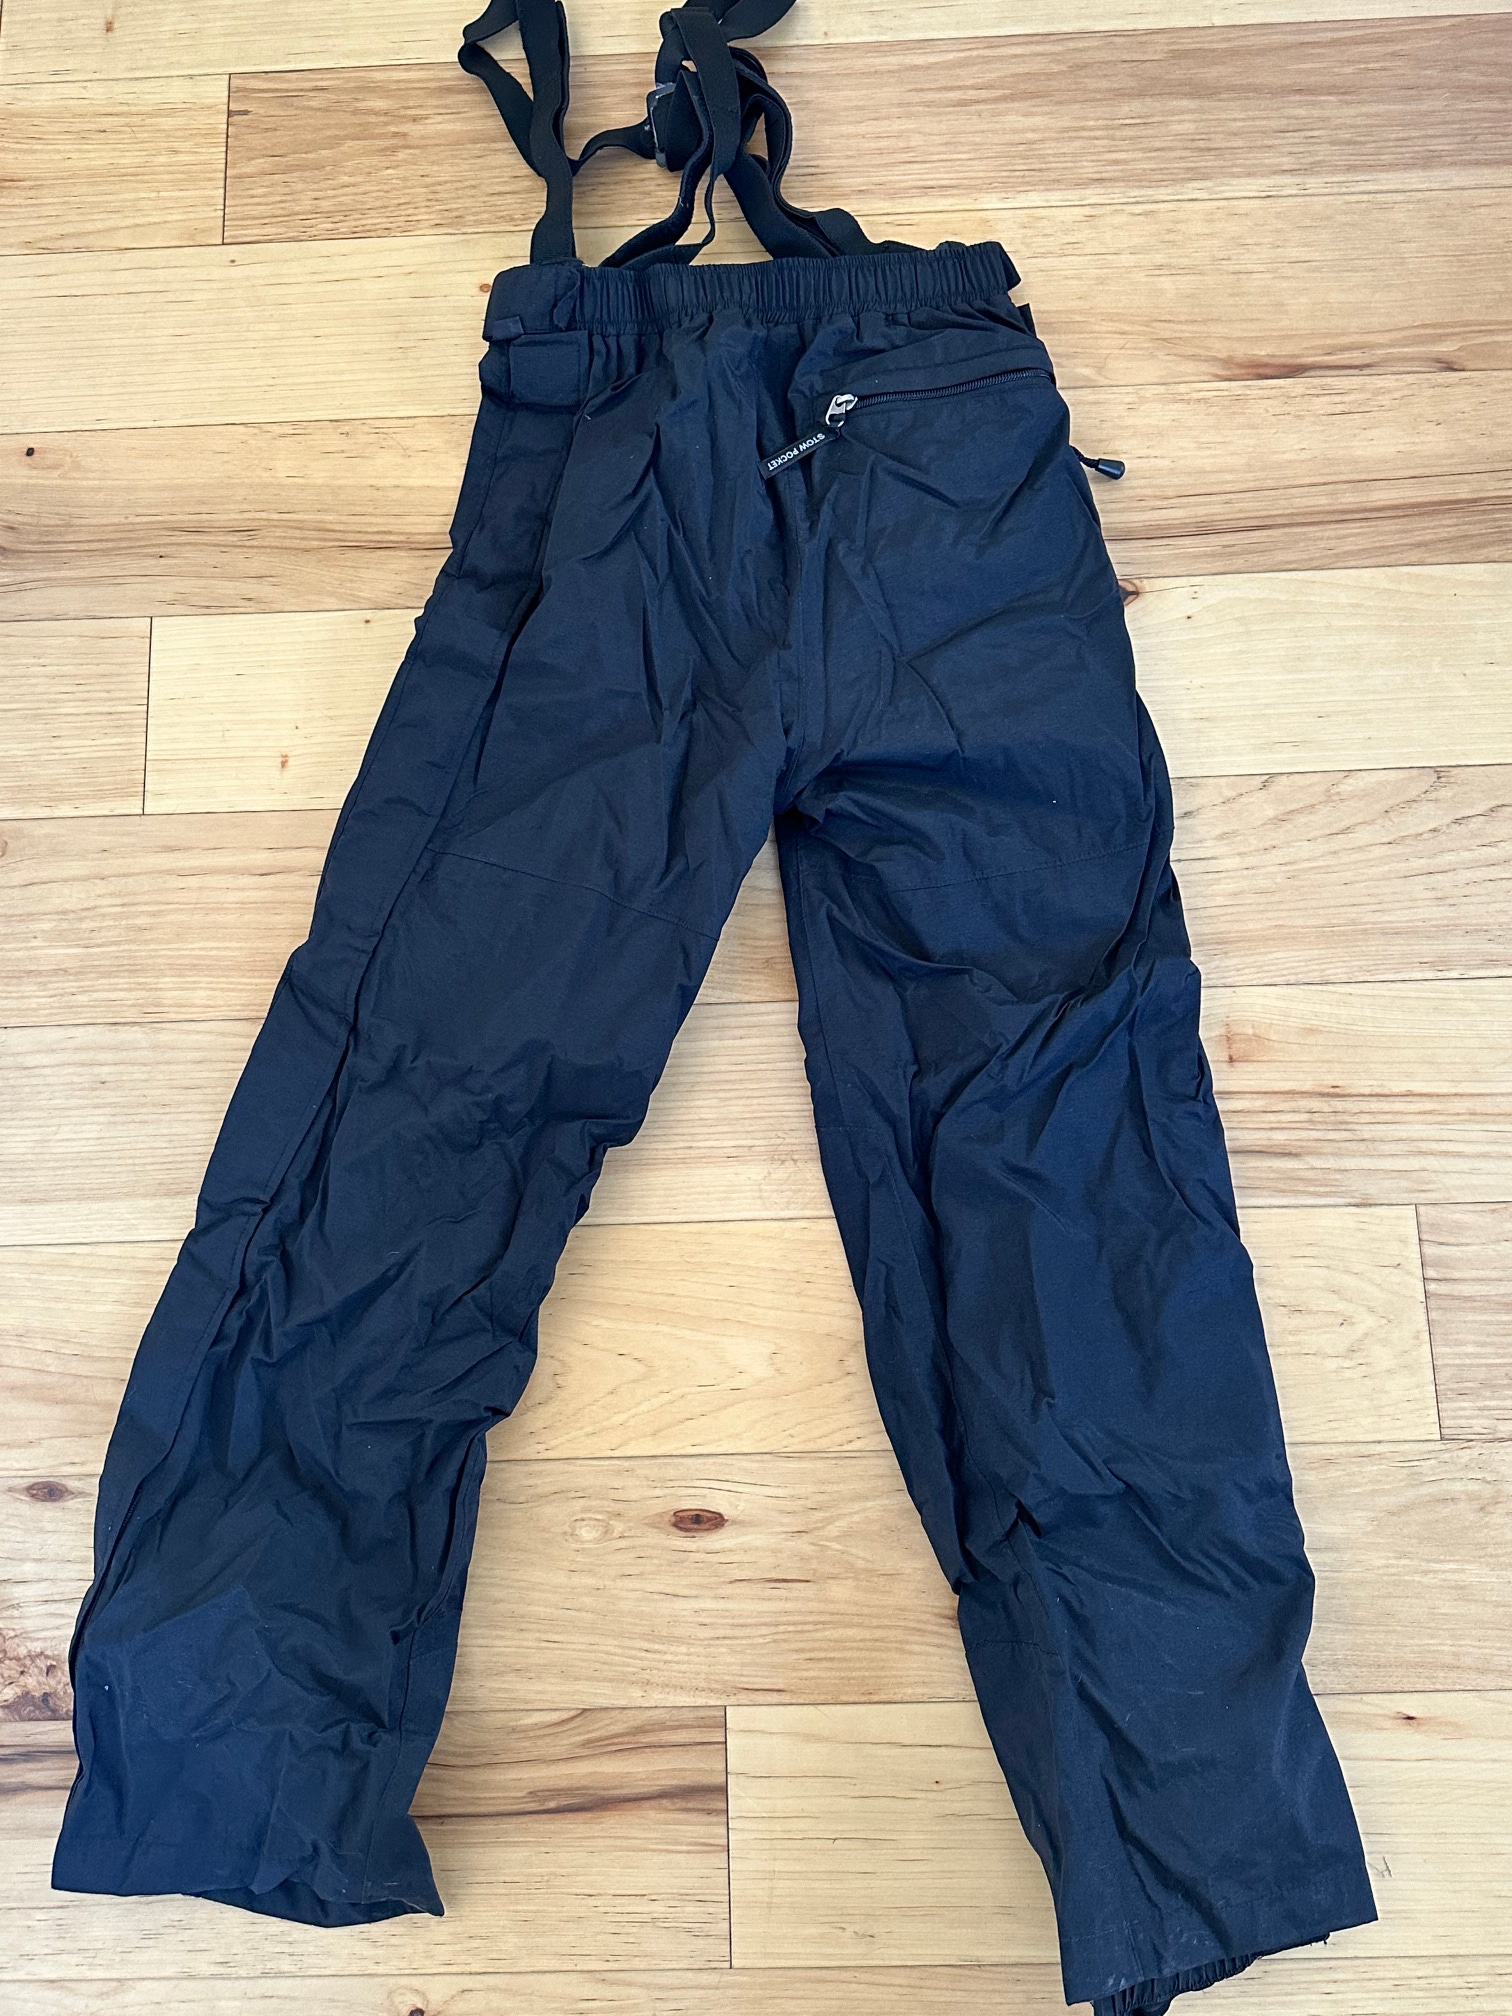 Men's Adult Used XS The North Face Ski Pants